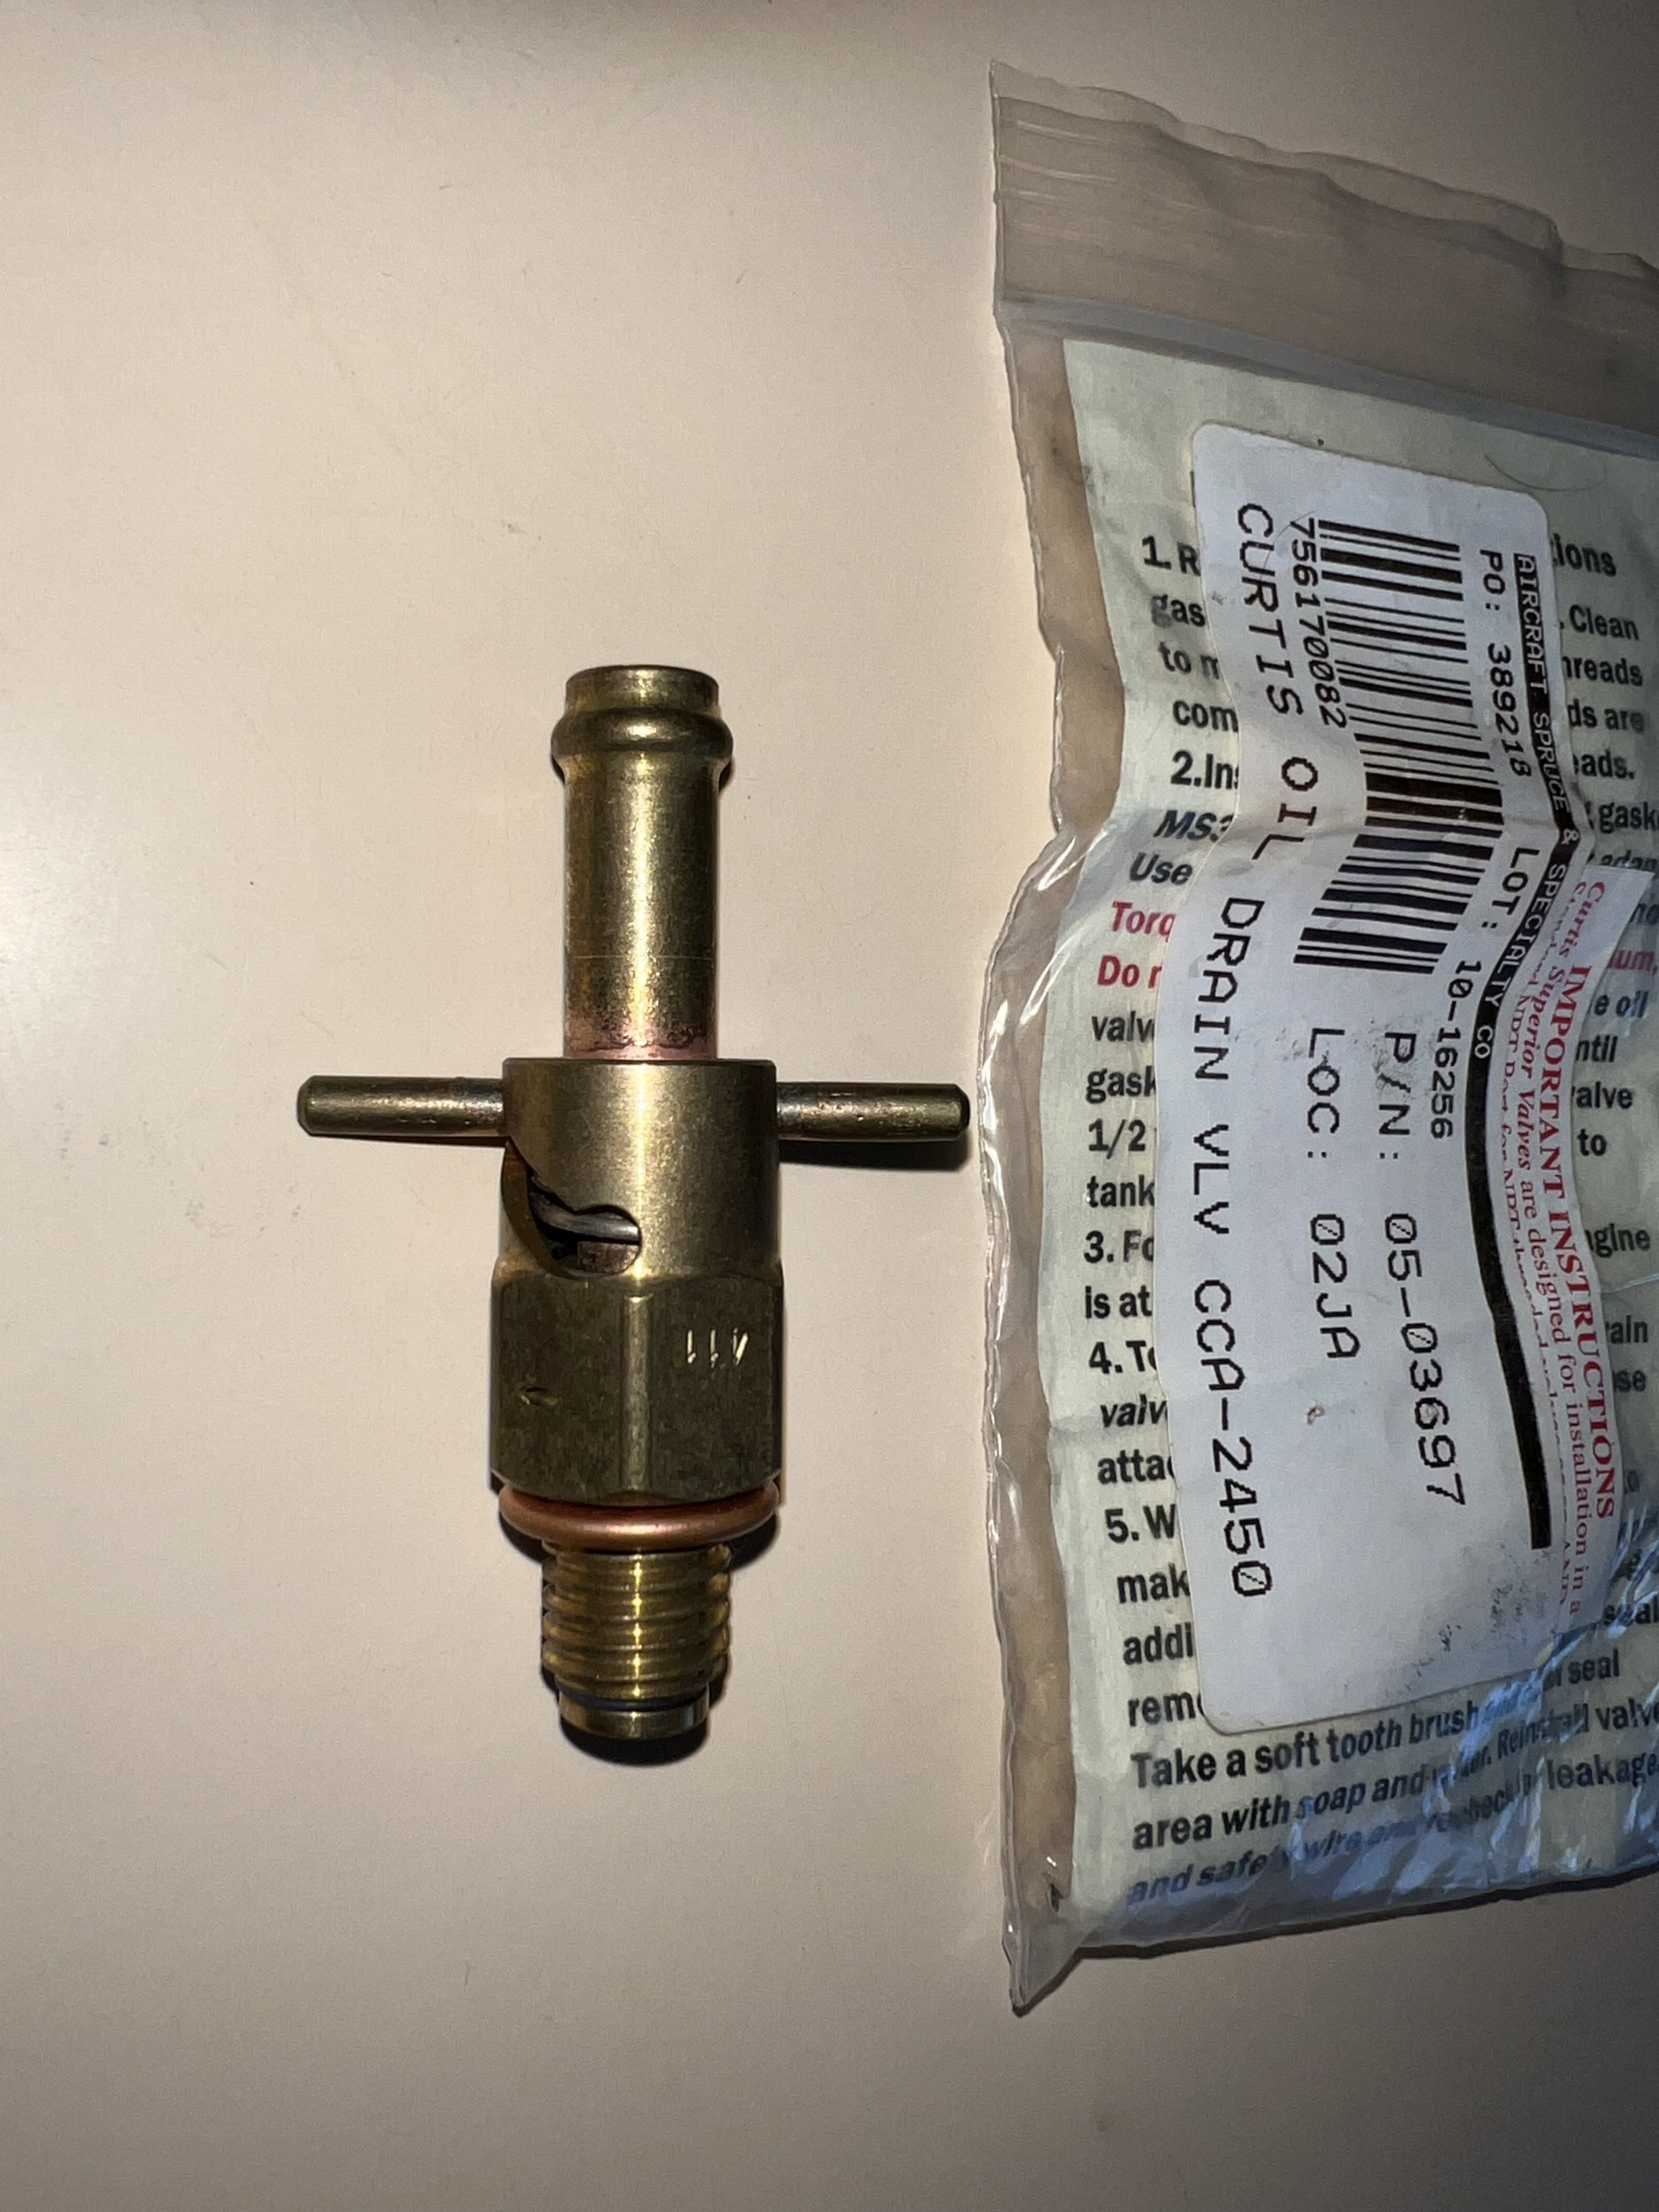 More information about "Curtis Oil Drain for Rotax oil can SOLD"